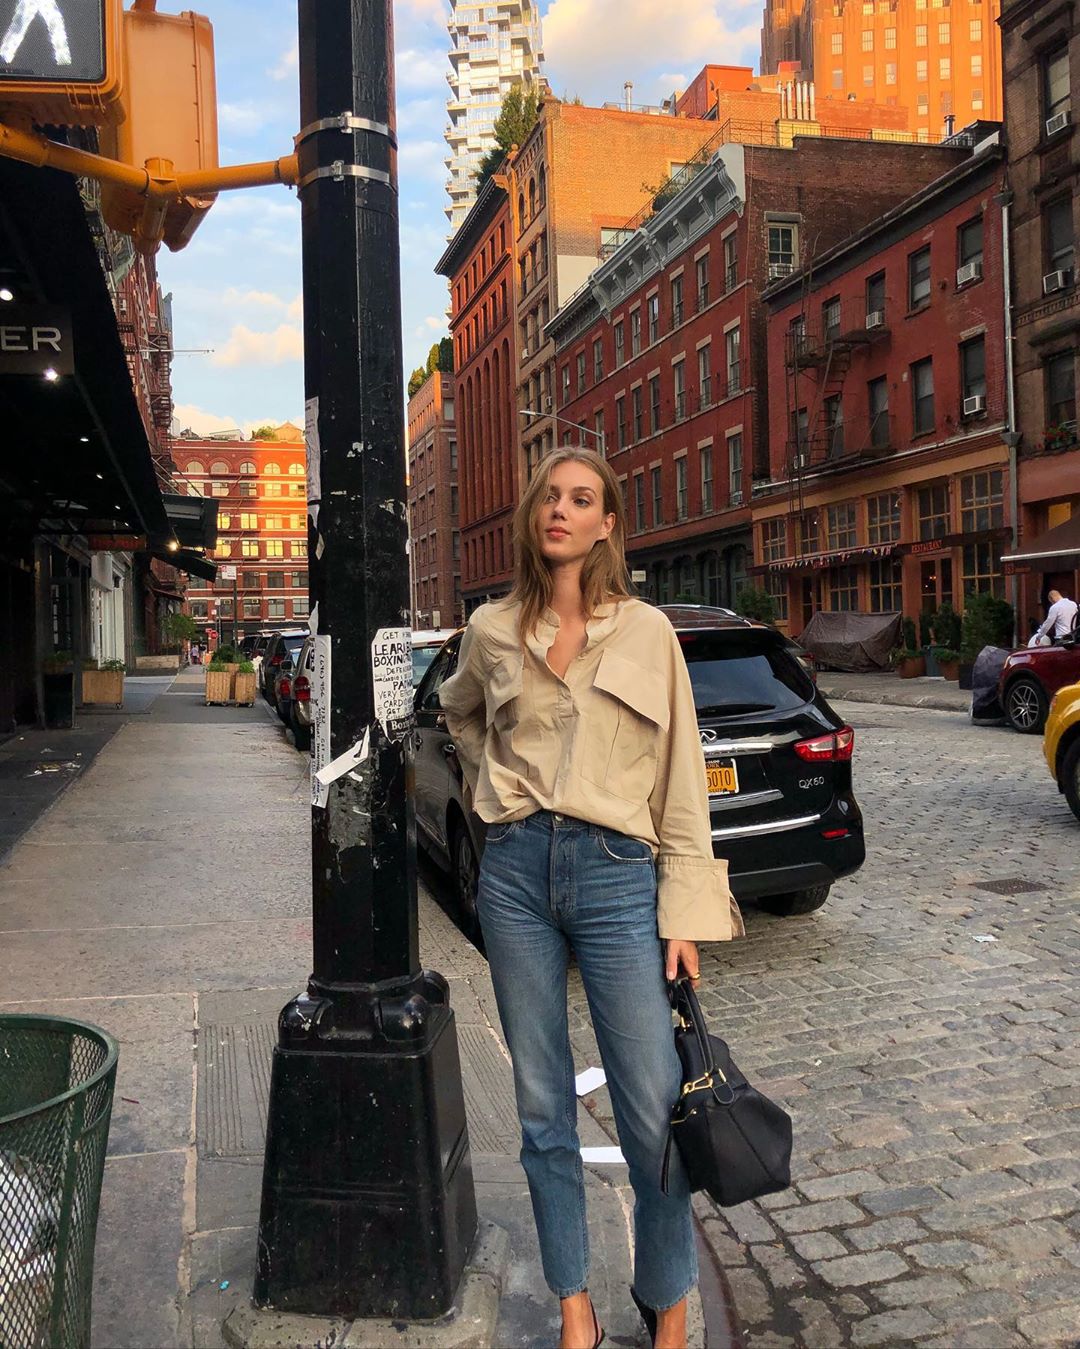 Transitional Chic Fall Outfit - Cecilie Moosgaard Nielsen in button-down shirt and denim jeans